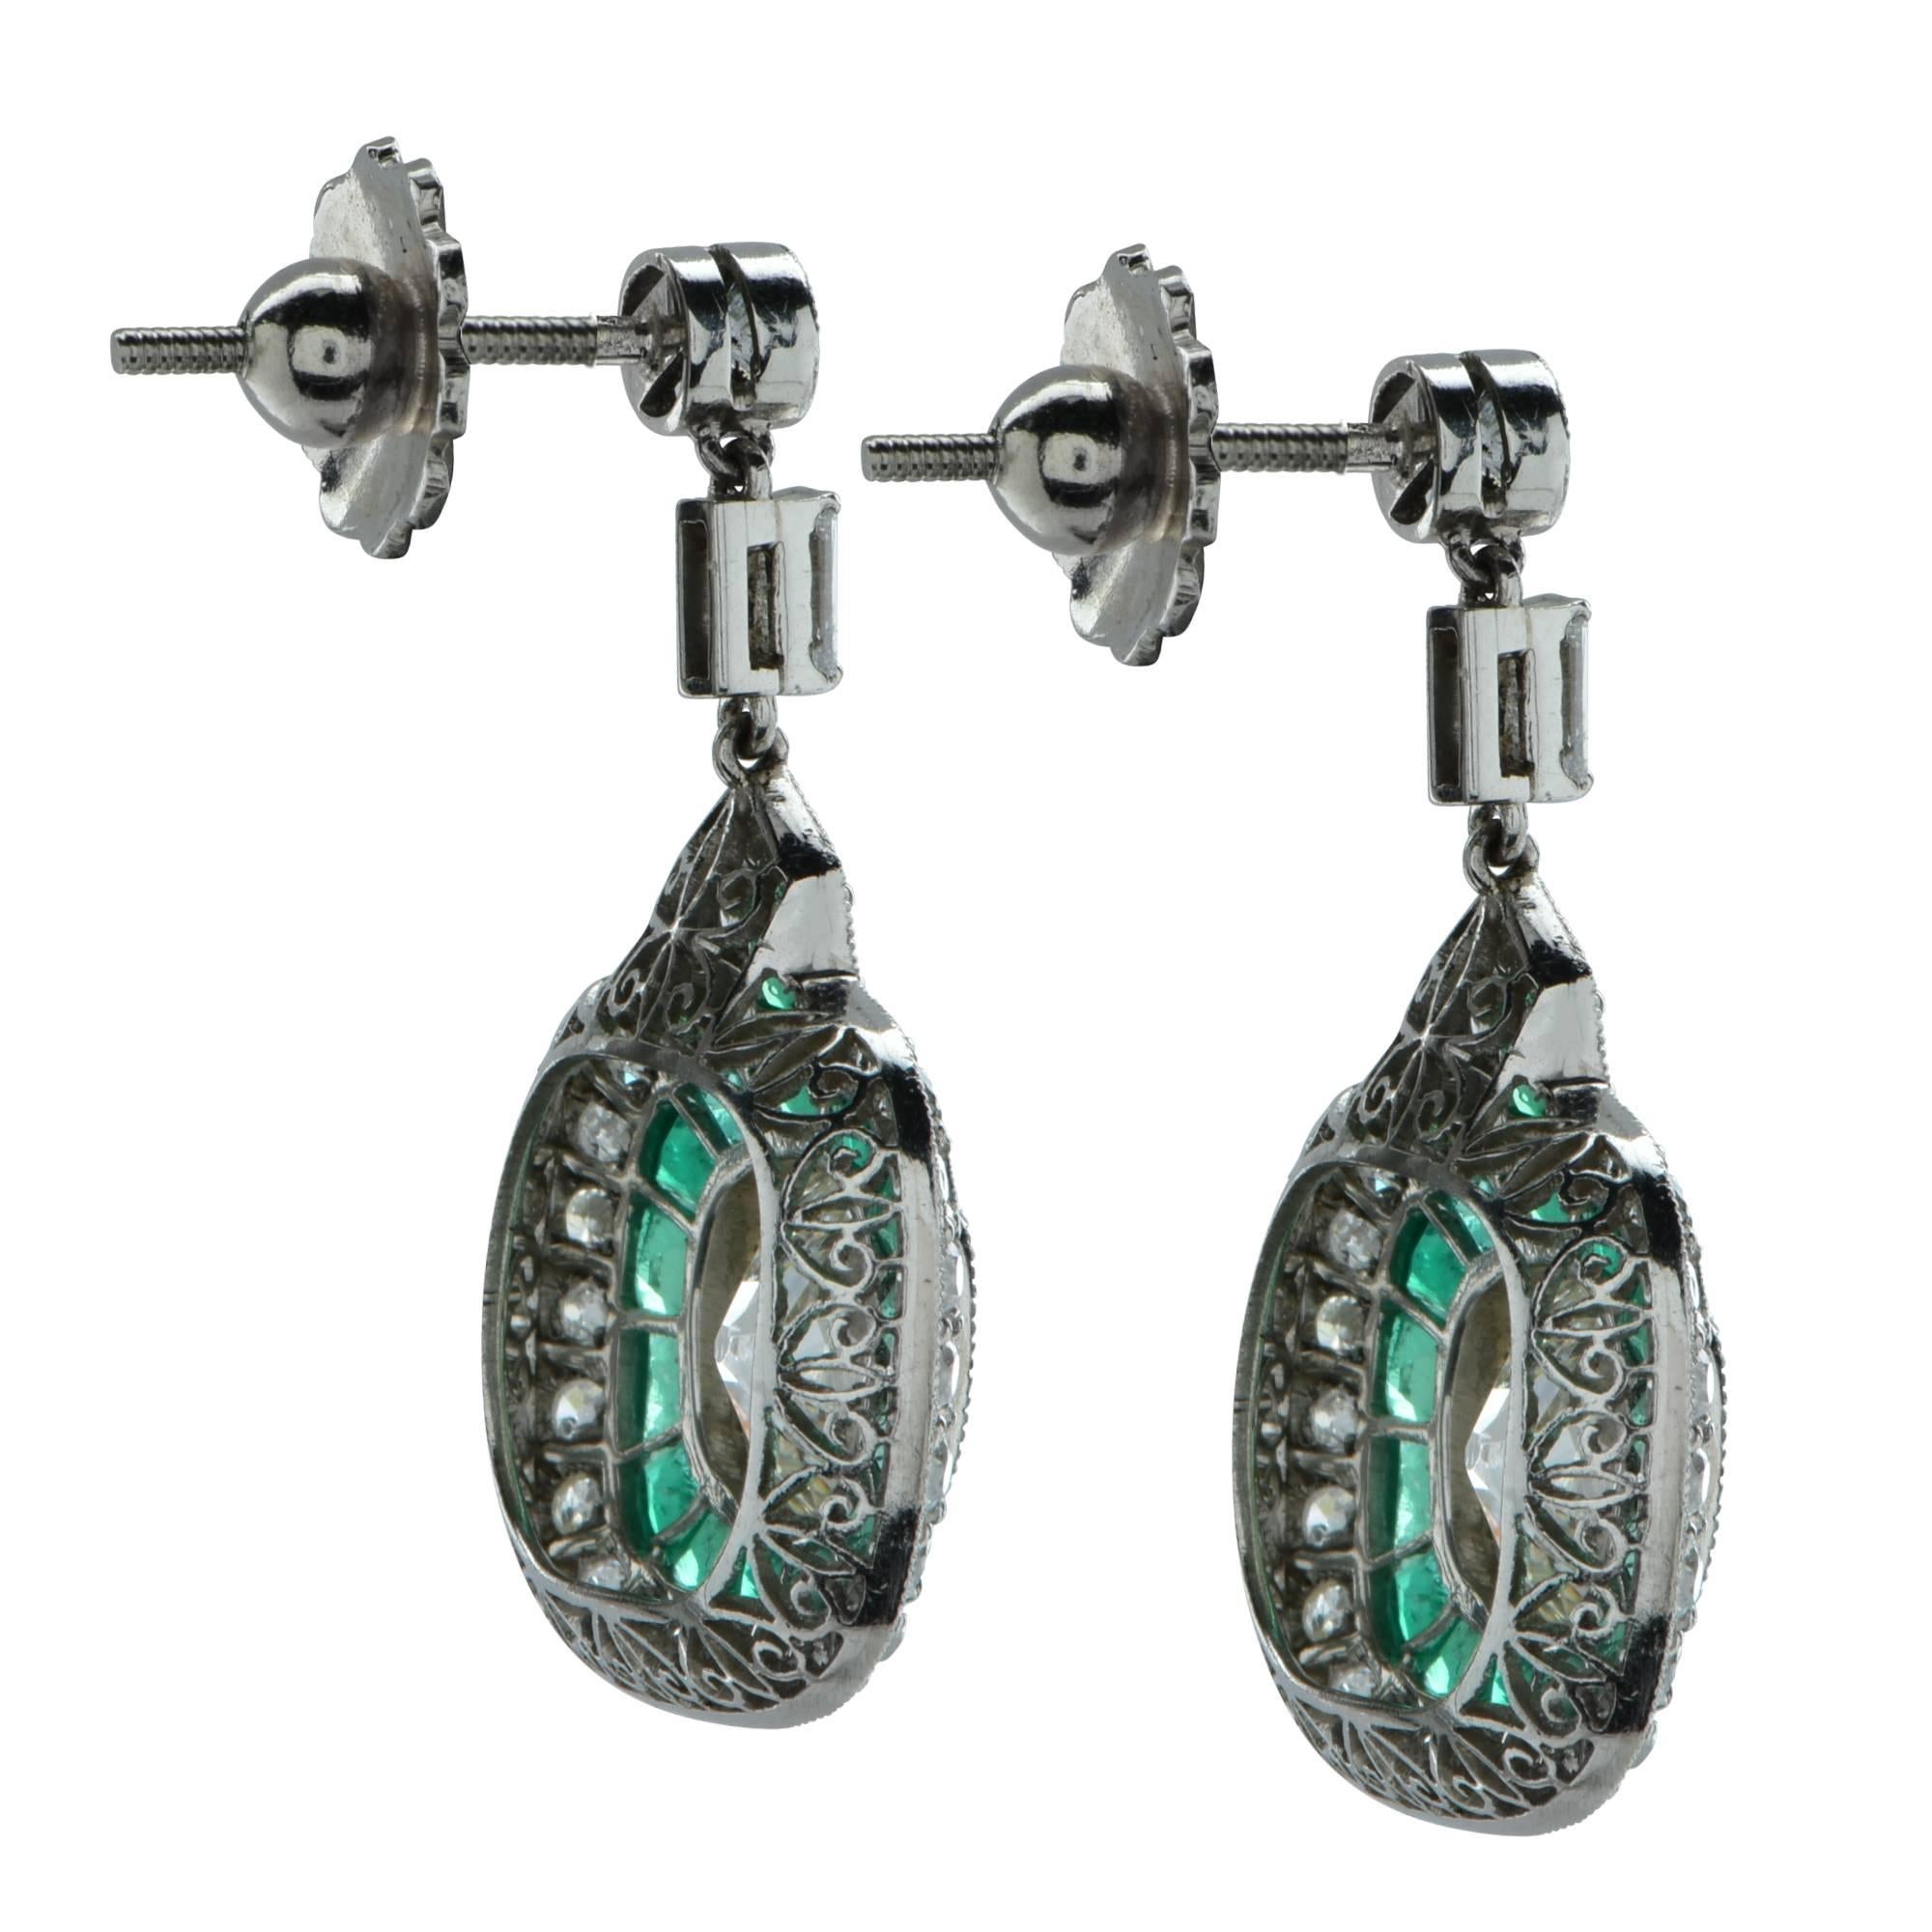 Stunning modern Art Deco style  articulating dangle earrings featuring 2 antique old mine cut diamonds weighing approximately 3.2 carats total, H color, SI clarity, set in platinum and framed with milgrain. The diamonds rest on a bed of 30 vivid